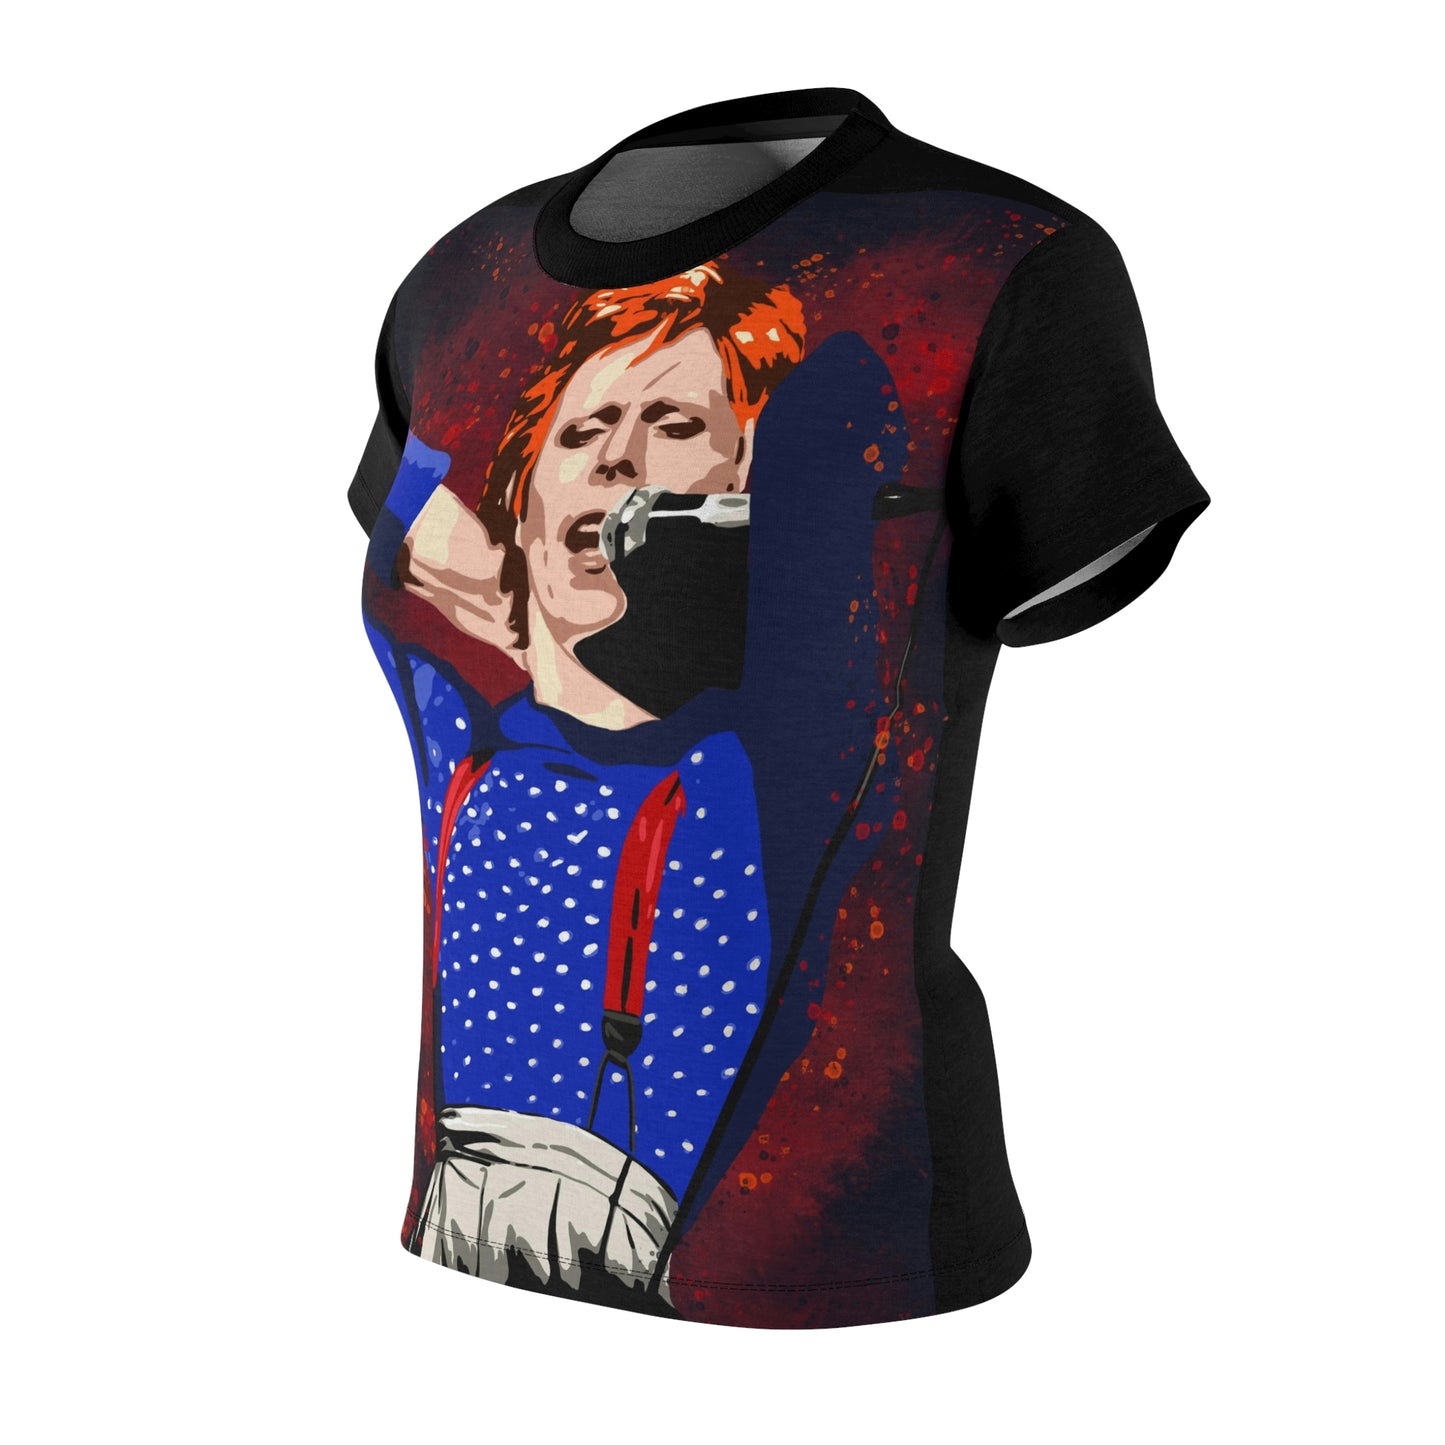 David Bowie T-shirt, Diamond Dogs tour, David Live, 1974, gift for Bowie fan, gift for music lover